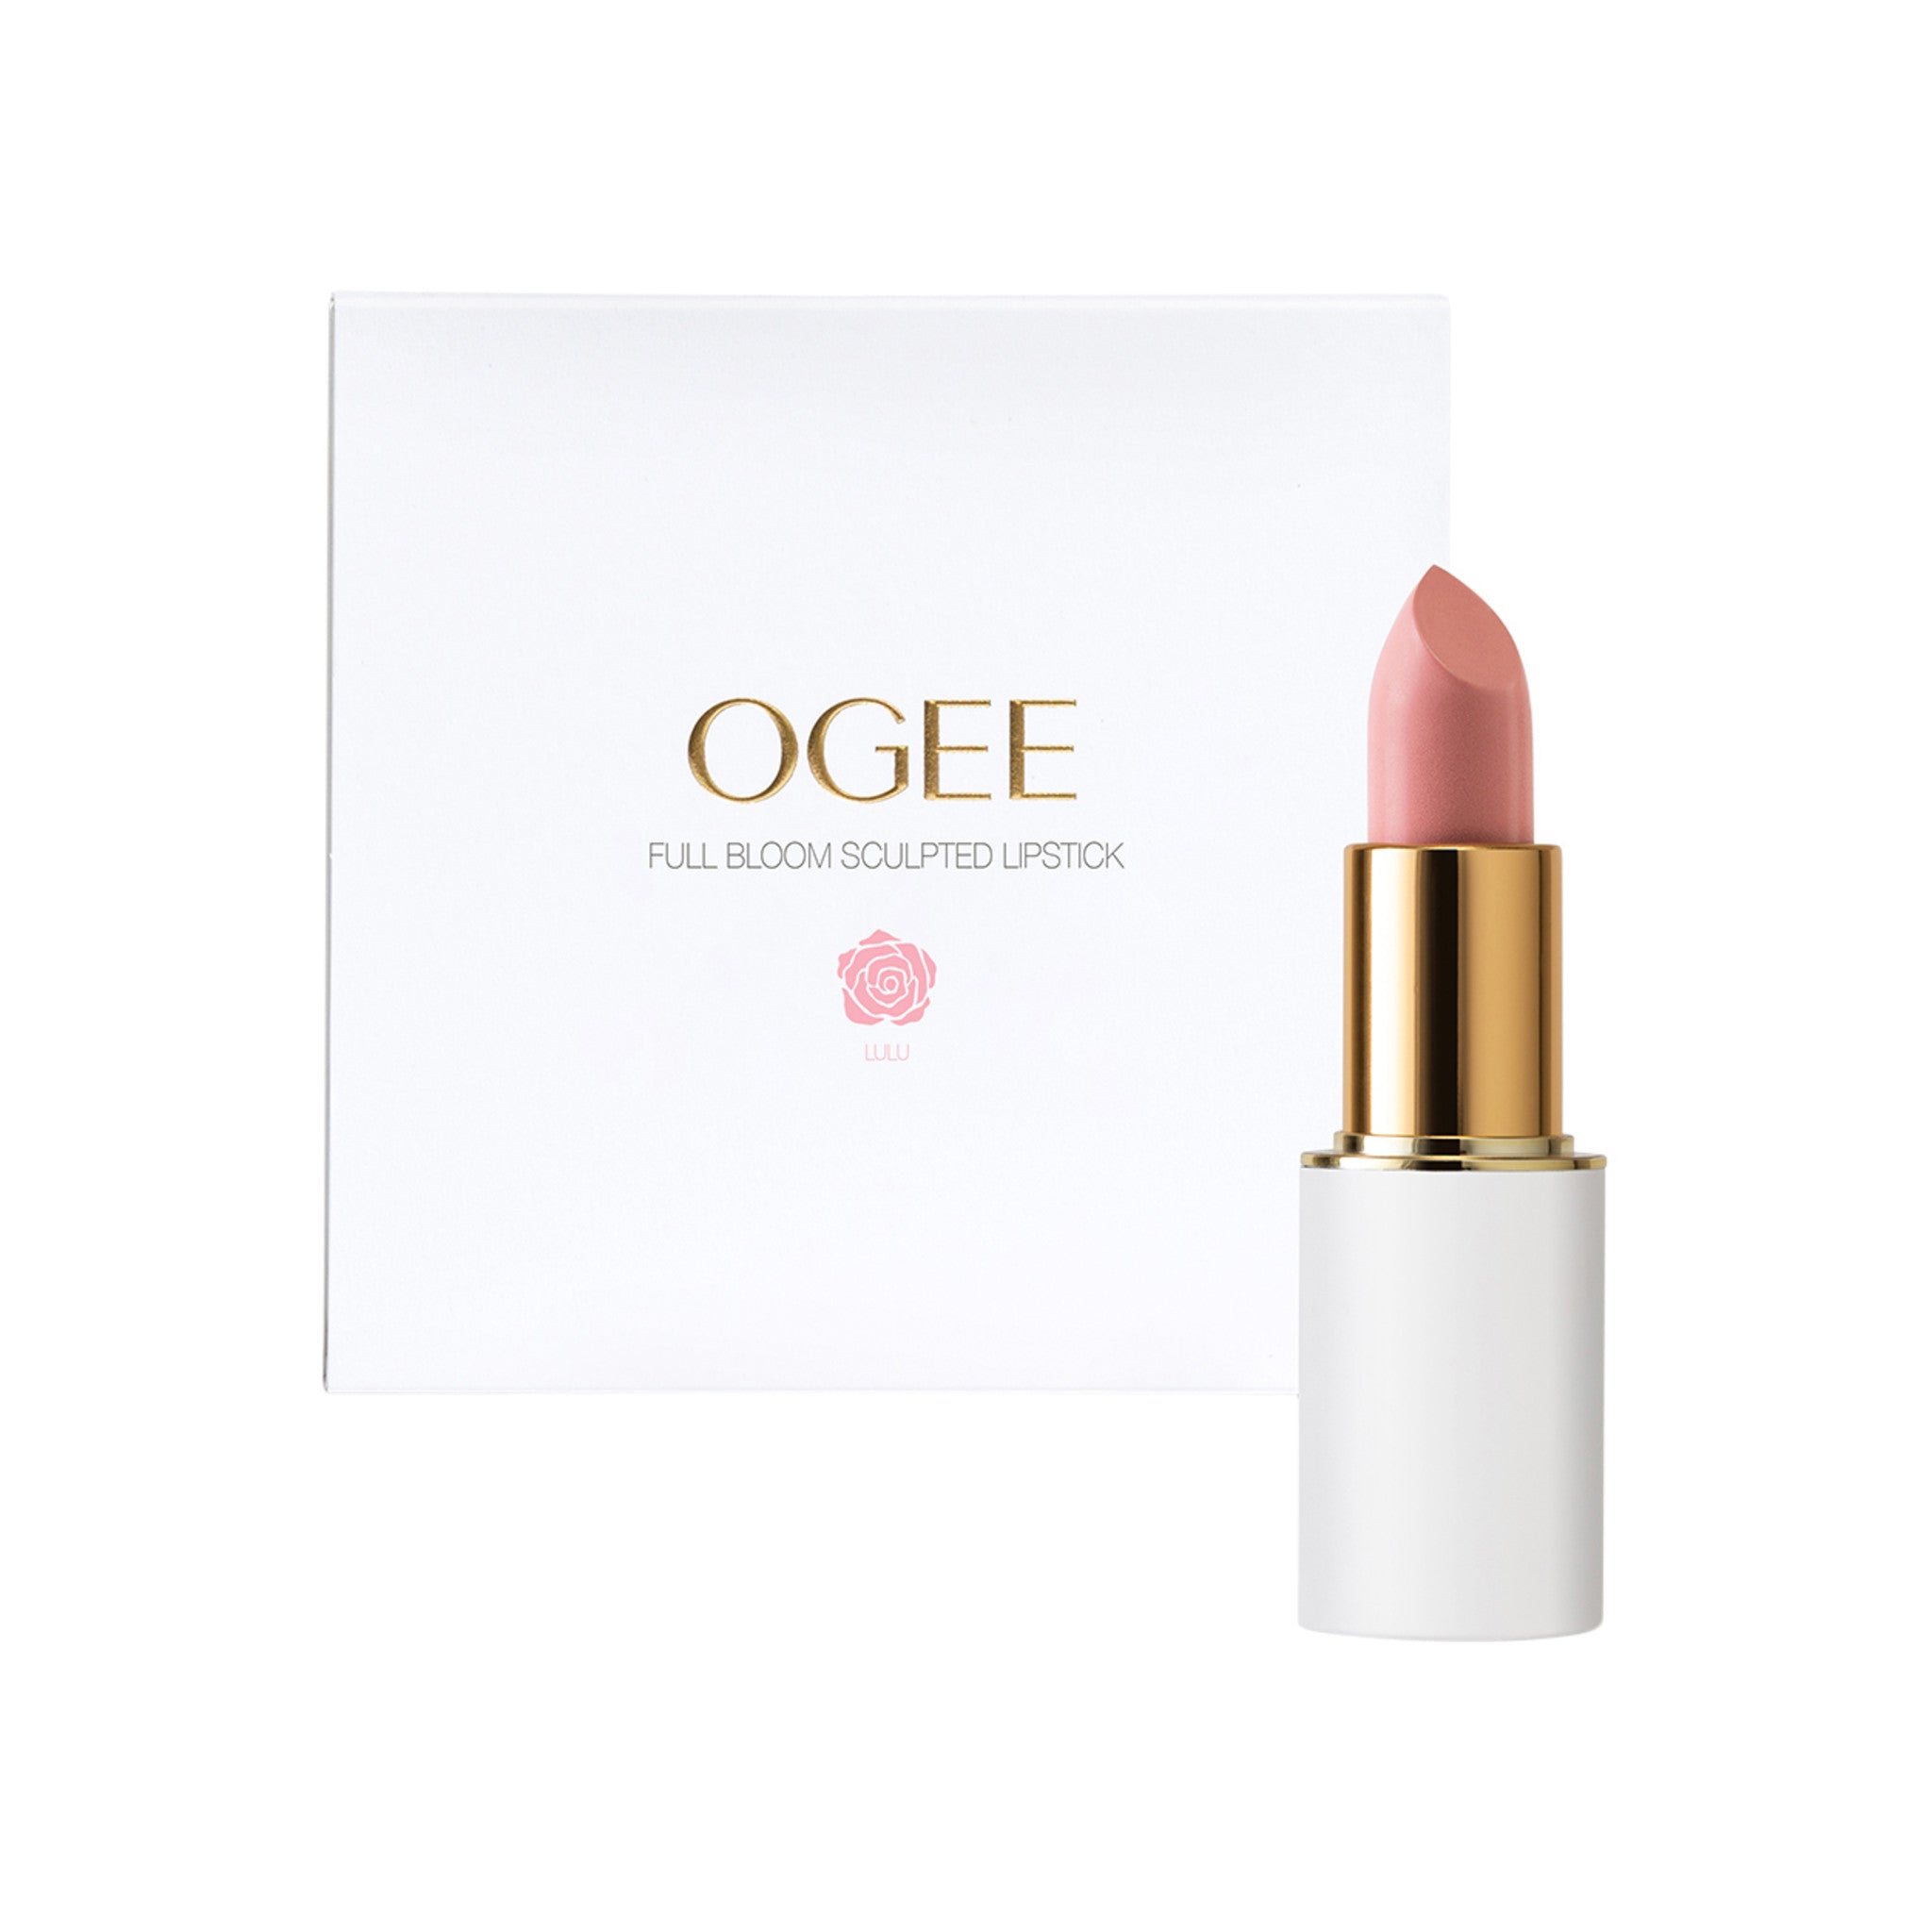 Ogee Full Bloom Sculpted Lipstick Color/Shade variant: Lulu main image. This product is in the color pink